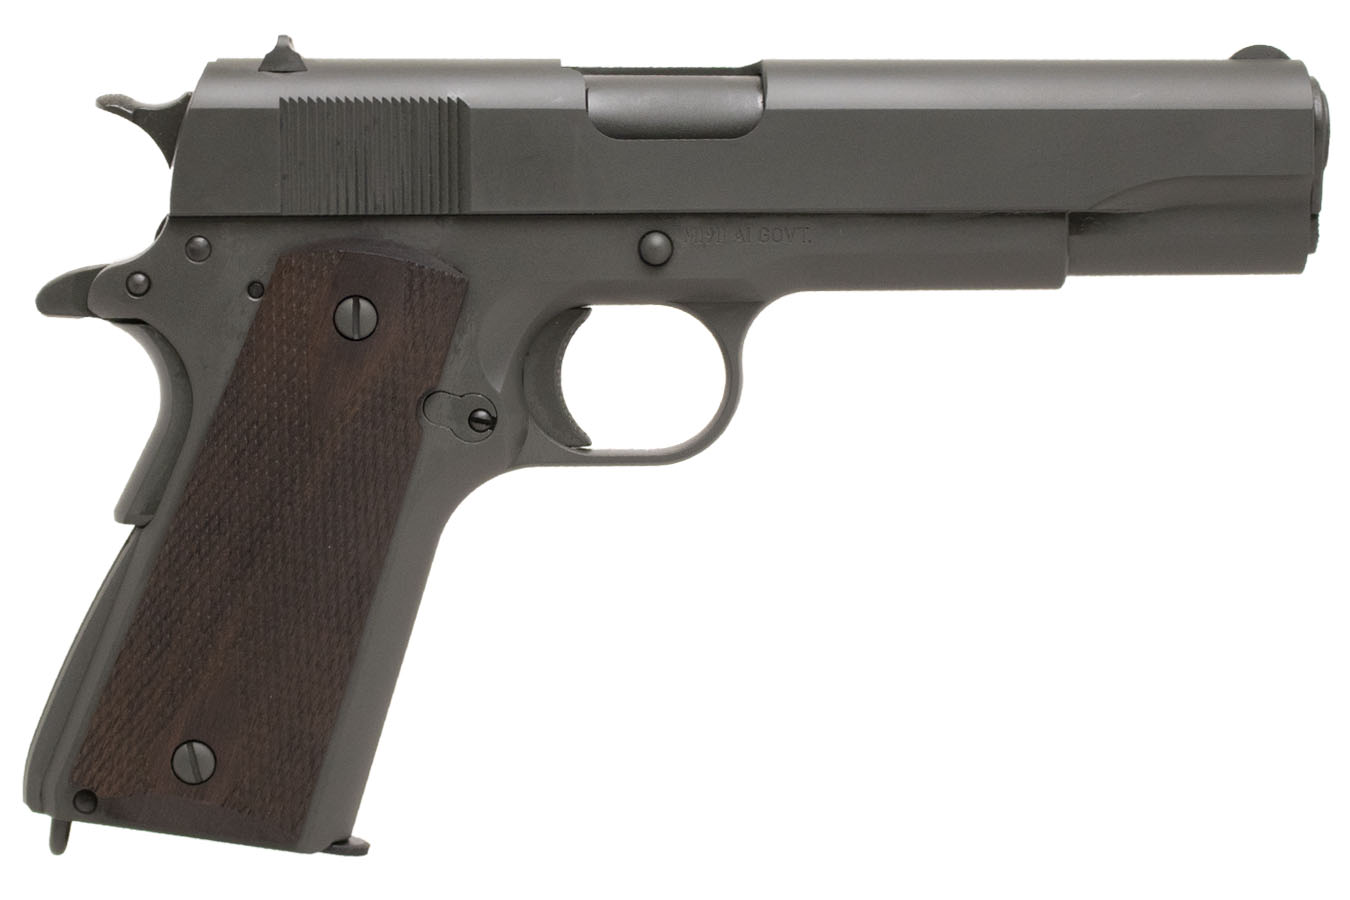 No. 1 Best Selling: TISAS 1911 GOVERNMENT 45 ACP 5 IN BBL PARKERIZED FINISH